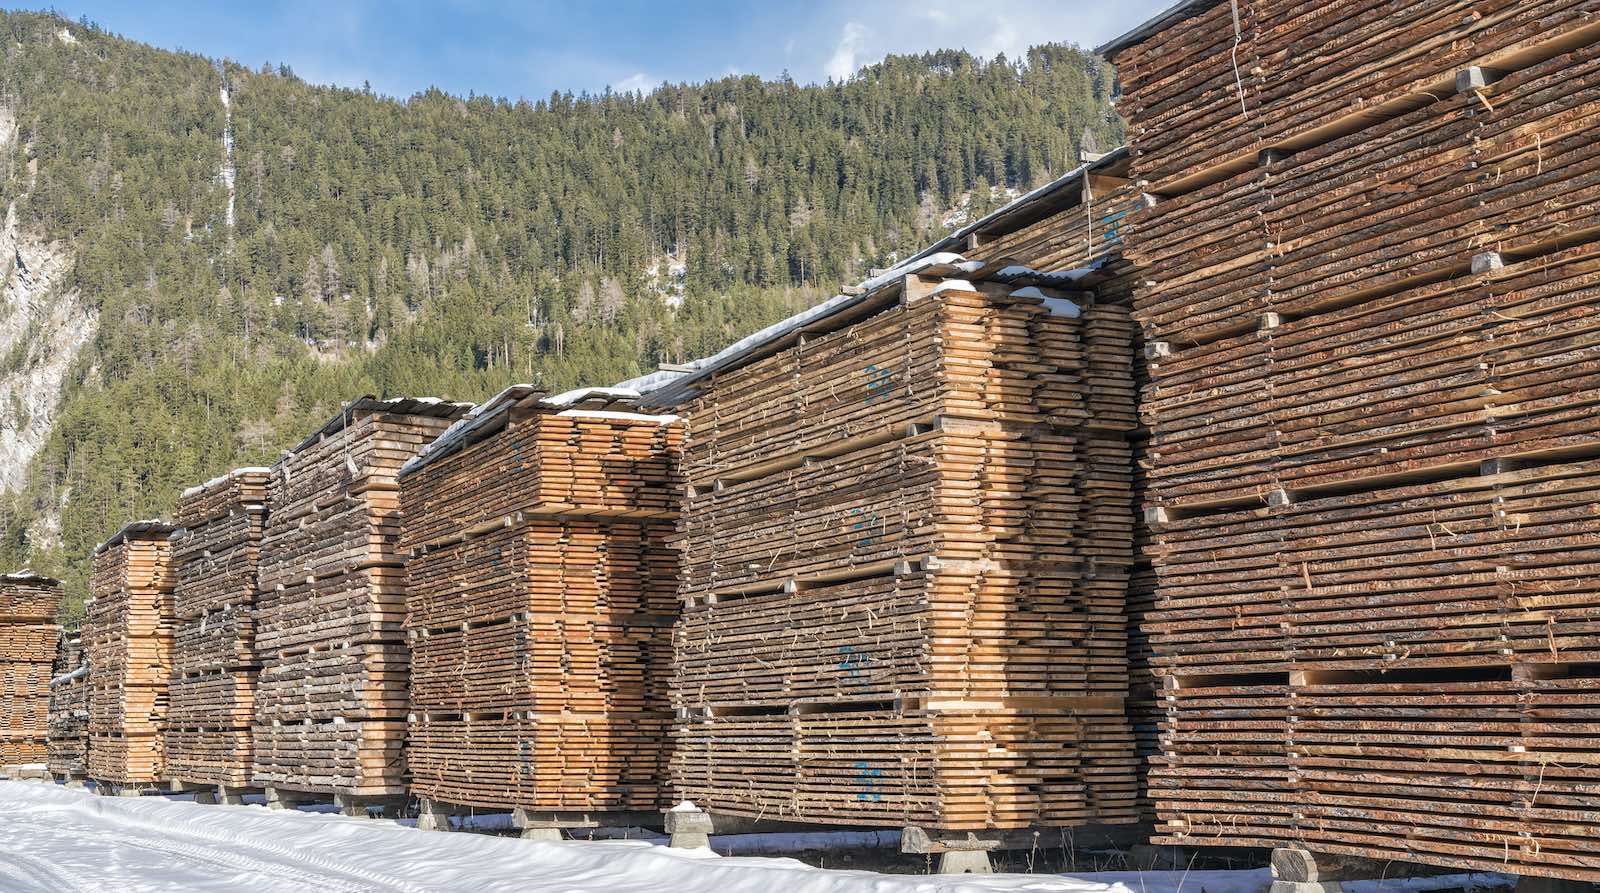 A lumberyard in winter, prone to the effects of climate change